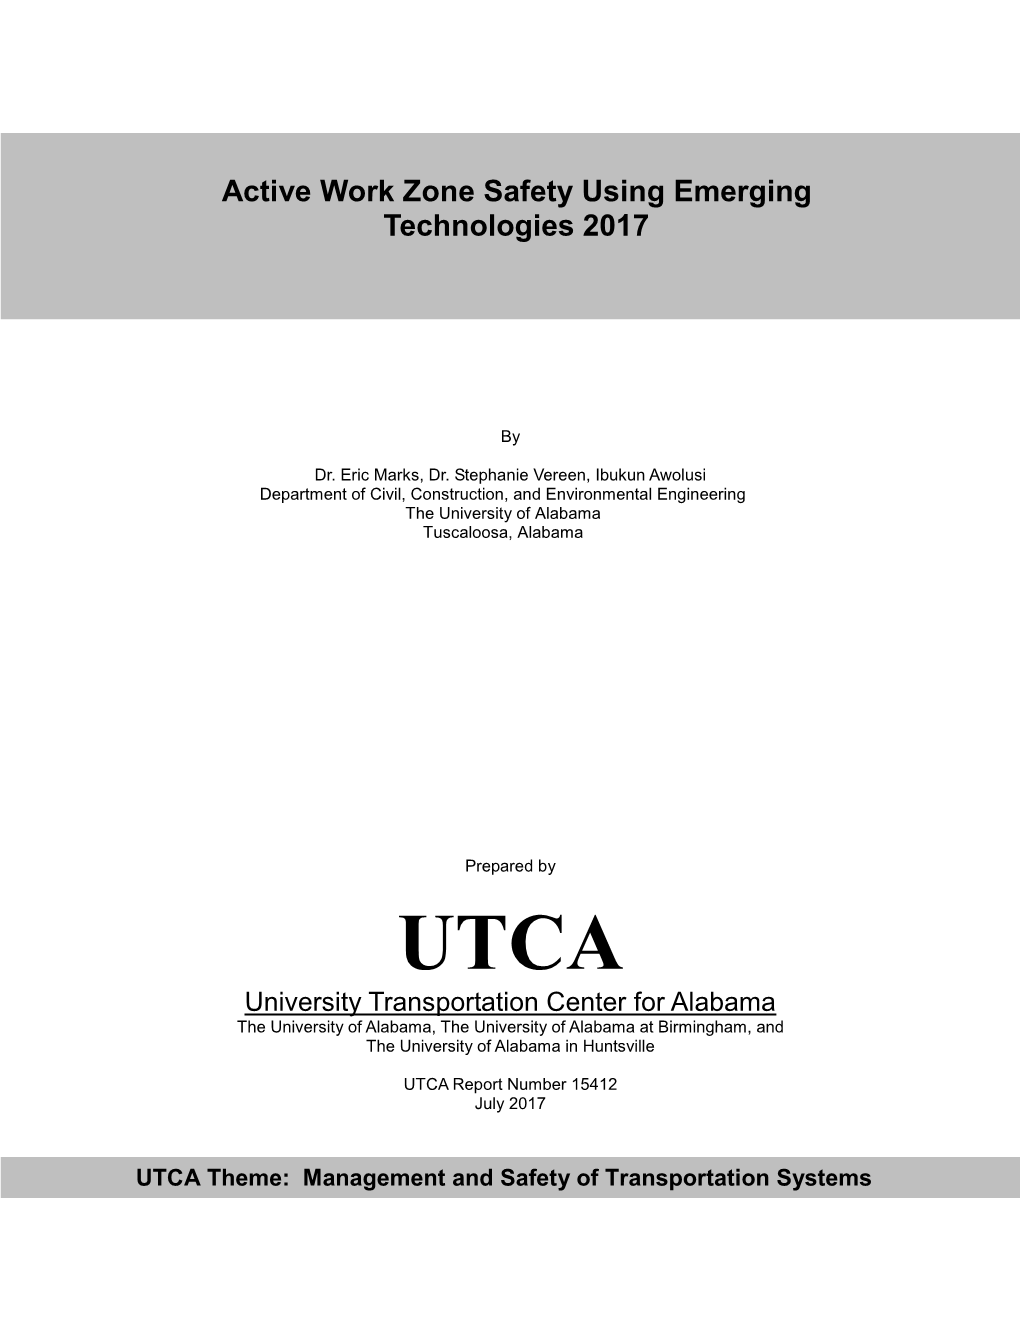 Active Work Zone Safety Using Emerging Technologies 2017